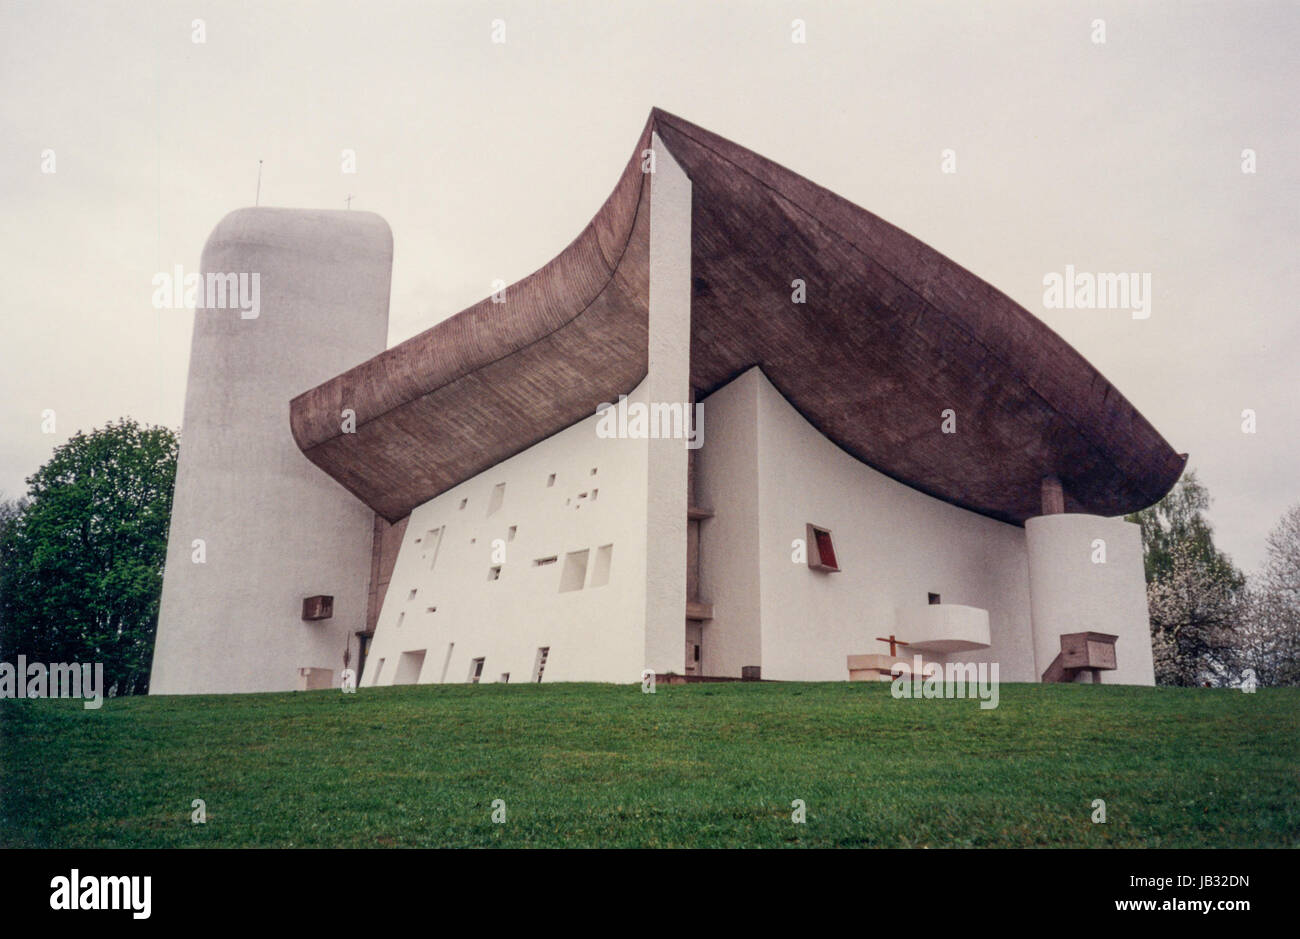 RONCHAMP, FRANCE - APRIL 25, 1996: The chapel of Notre Dame du Haut designed by Le Corbusier in 1954 is a masterpiece of modern religious architecture Stock Photo